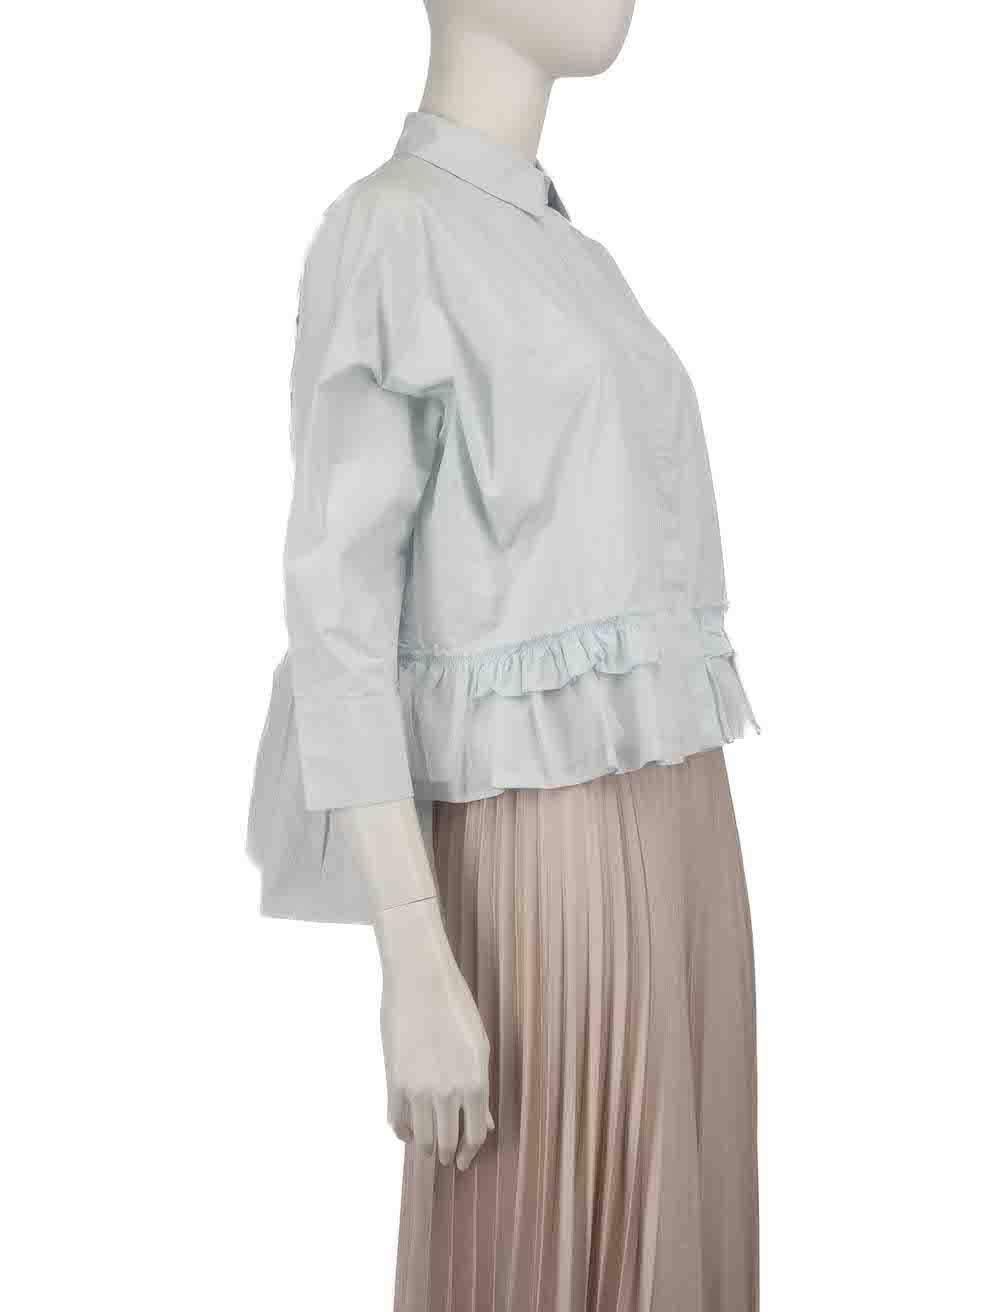 CONDITION is Good. Minor wear to the top is evident. Light wear to the fabric surface with light discolouration seen under the arms. A number of stray thread ends can also be found above the ruffle detailing on this used Dorothee Schumacher designer